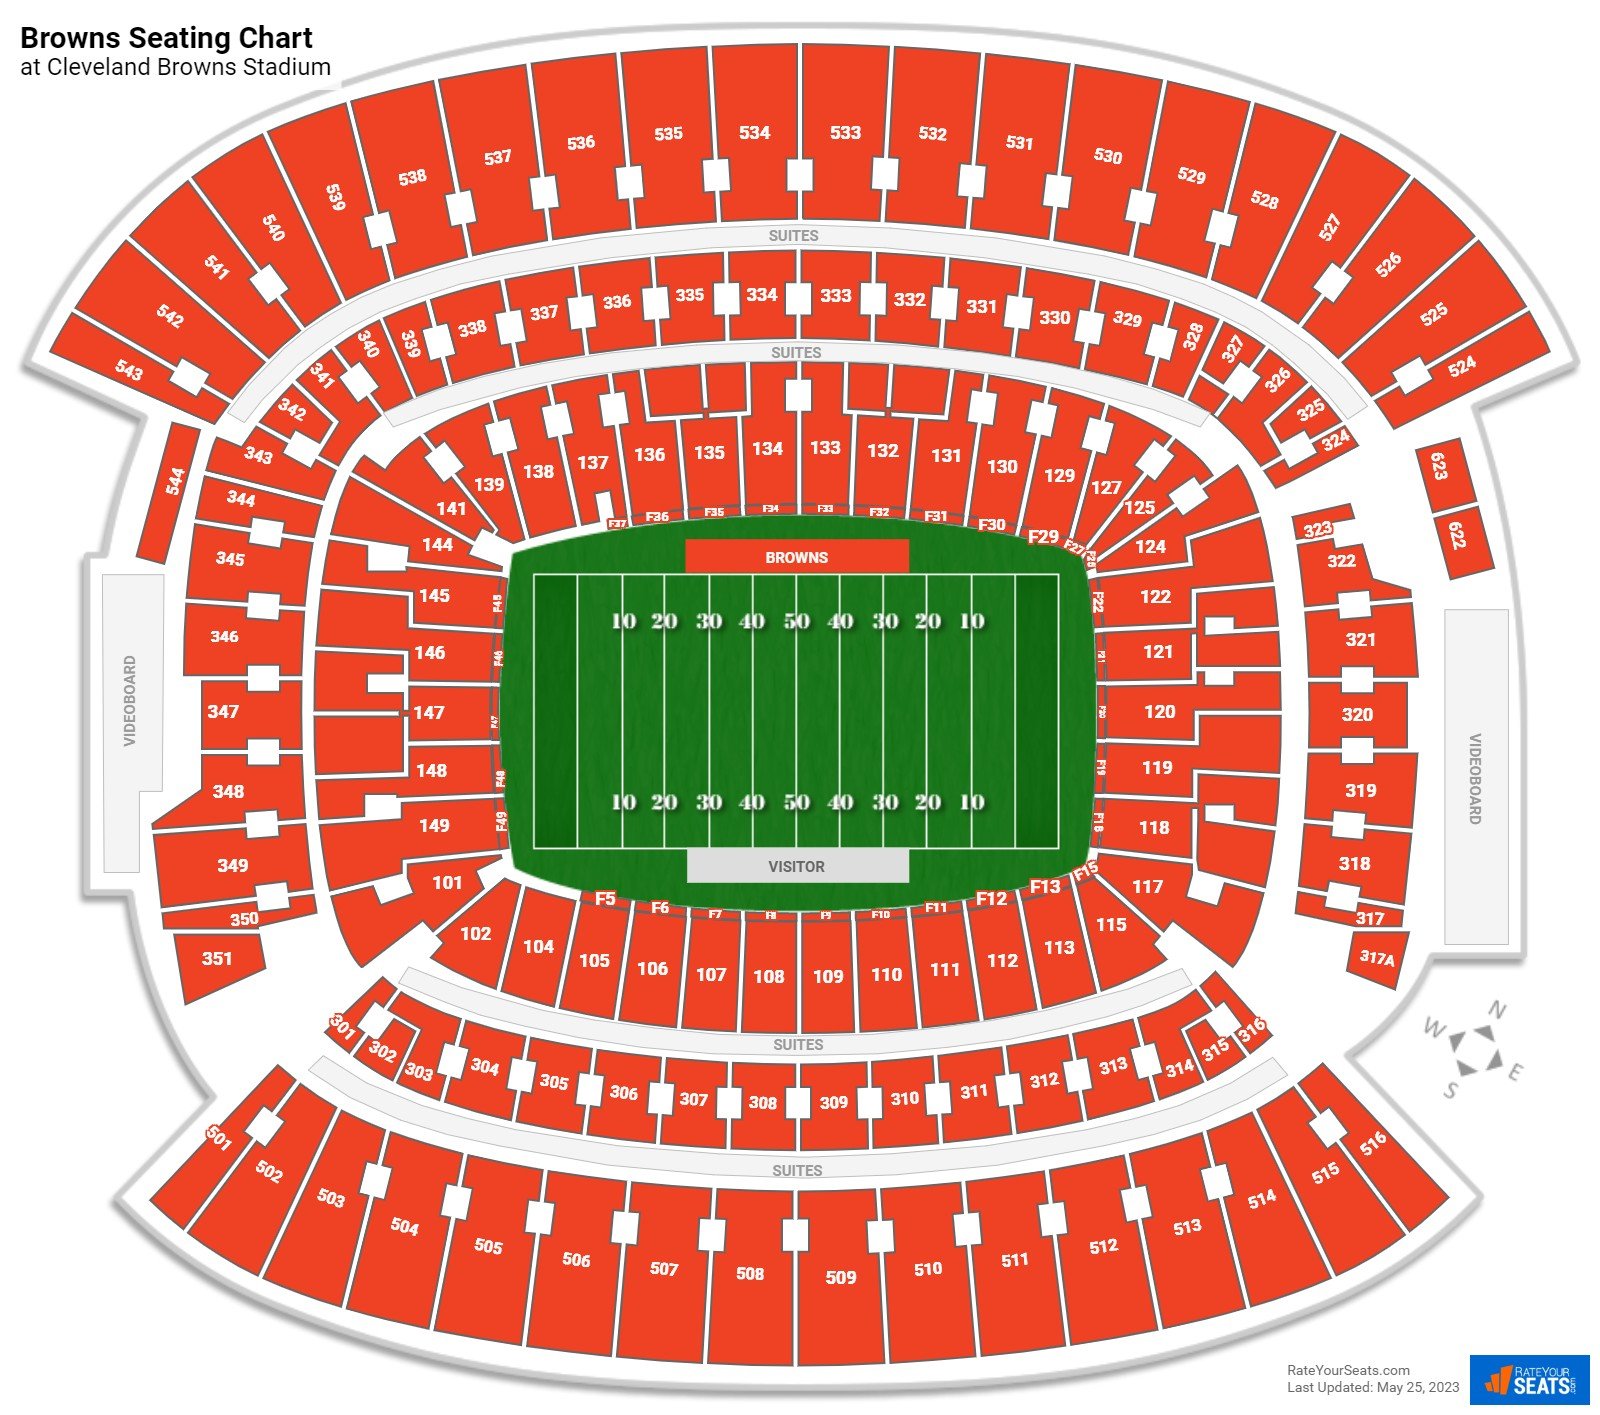 Cleveland Browns Seating Chart at First Energy Stadium (Cleveland Browns Stadium)